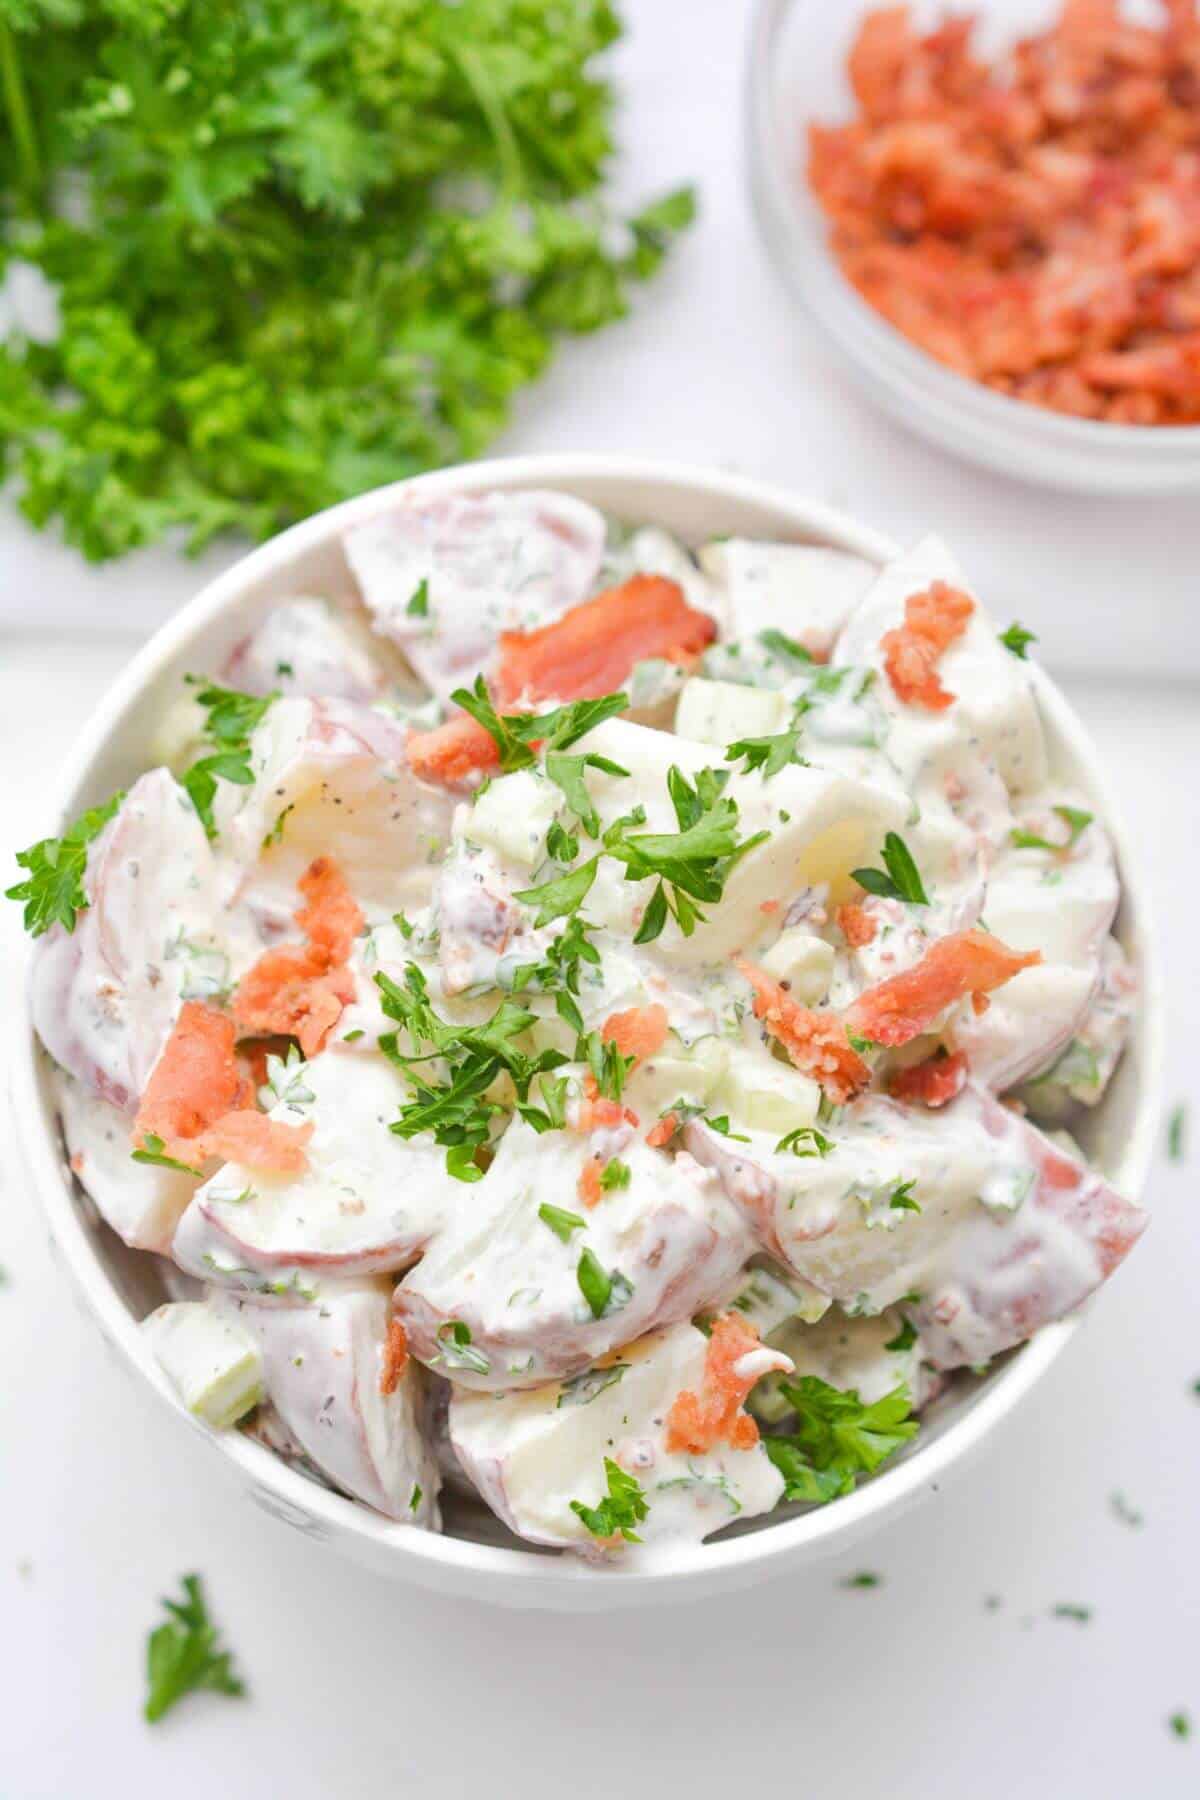 Overhead view of potato salad in bowl with parsley and chopped bacon.